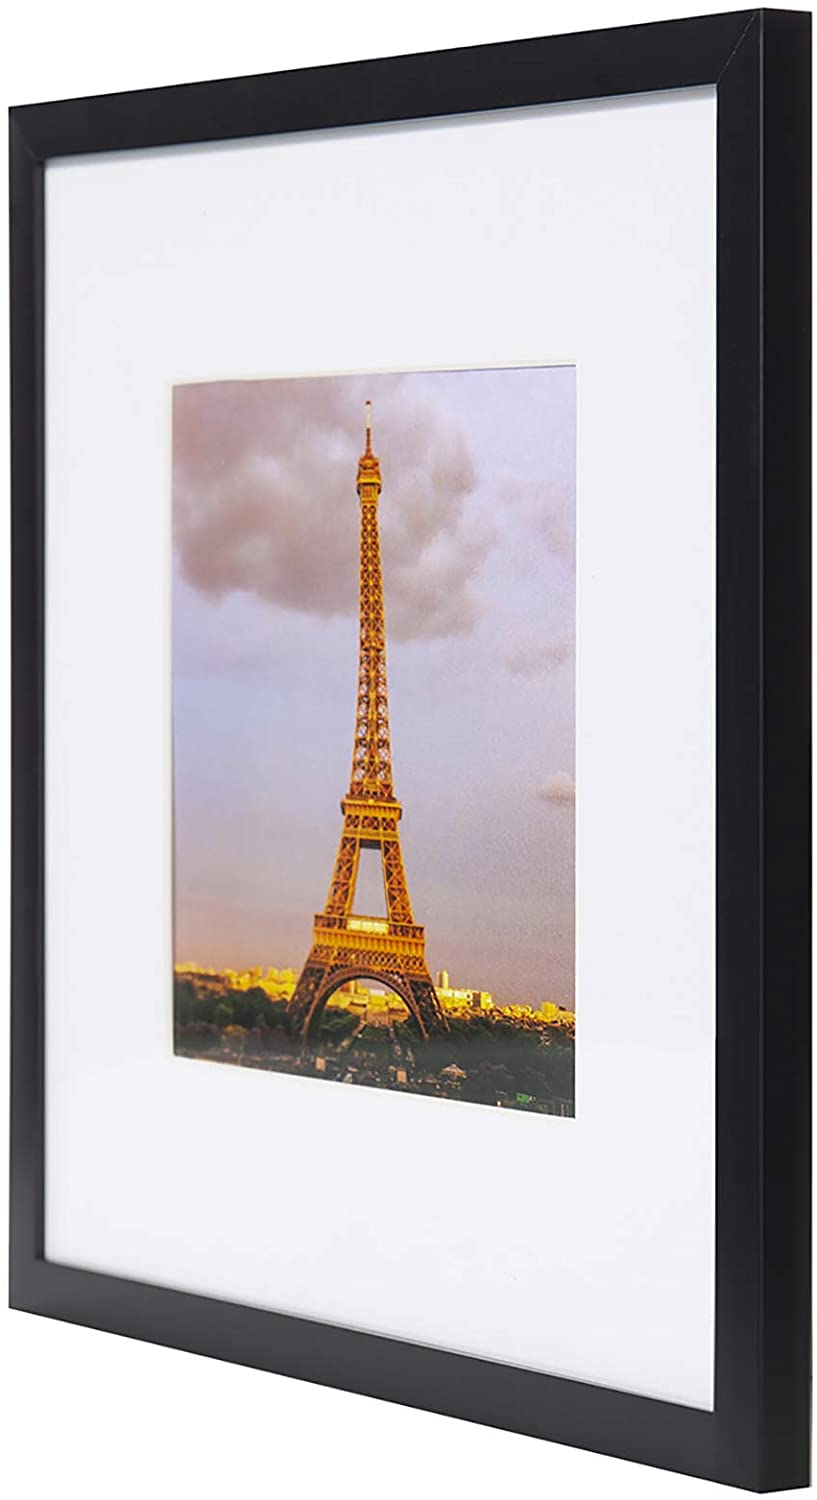 upsimples 12x12 Picture Frame, Display Pictures 8x8 with Mat or 12x12  Without Mat, Wall Hanging Photo Frame, Black, 1 Pack